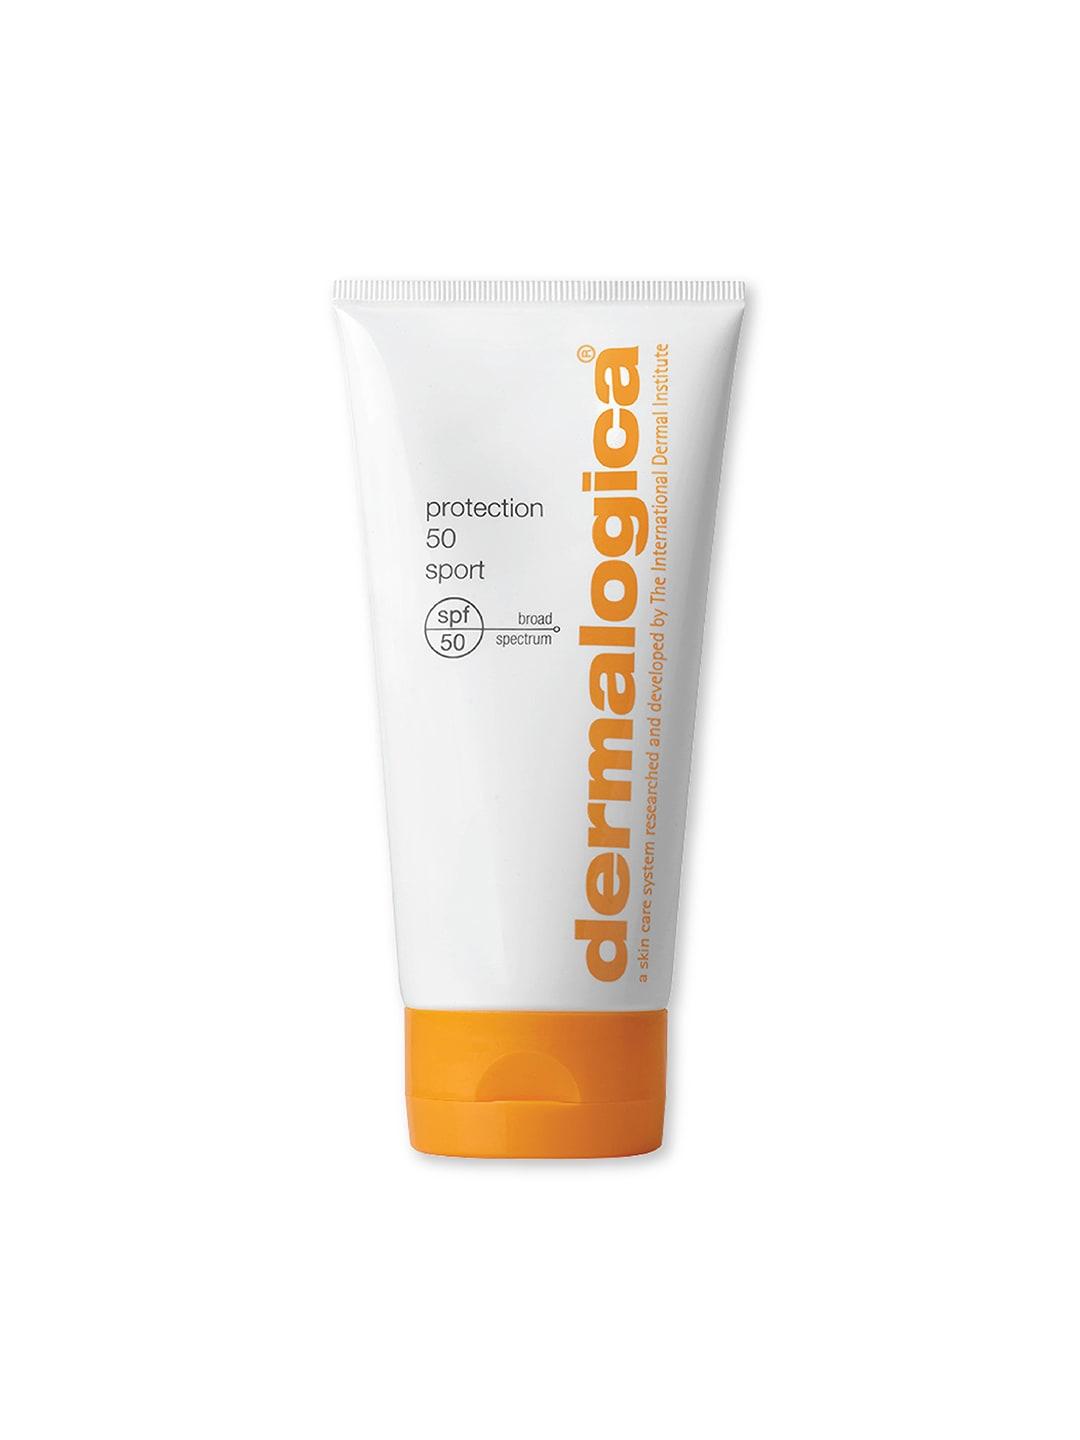 dermalogica protection 50 sport spf50 face & body sunscreen with hyaluronic acid - 156 ml